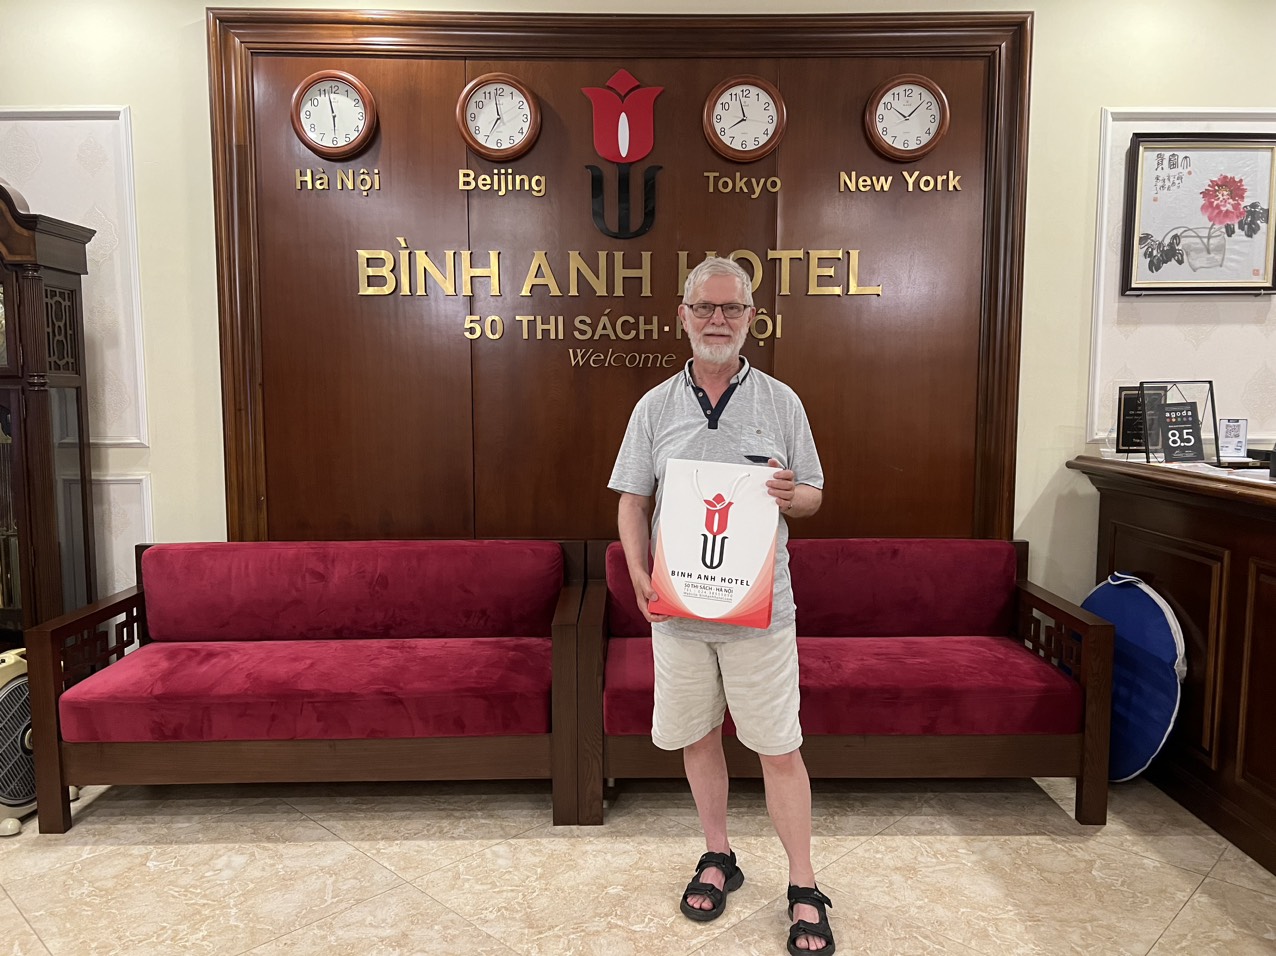 <p>I booked 4 nights at Binh Anh Hotel on Experia channel. It was clean, attentive service, very reasonable price.<br />
Thank you for giving me the gift! I will recommend Binh Anh Hotel to my friends.</p>
